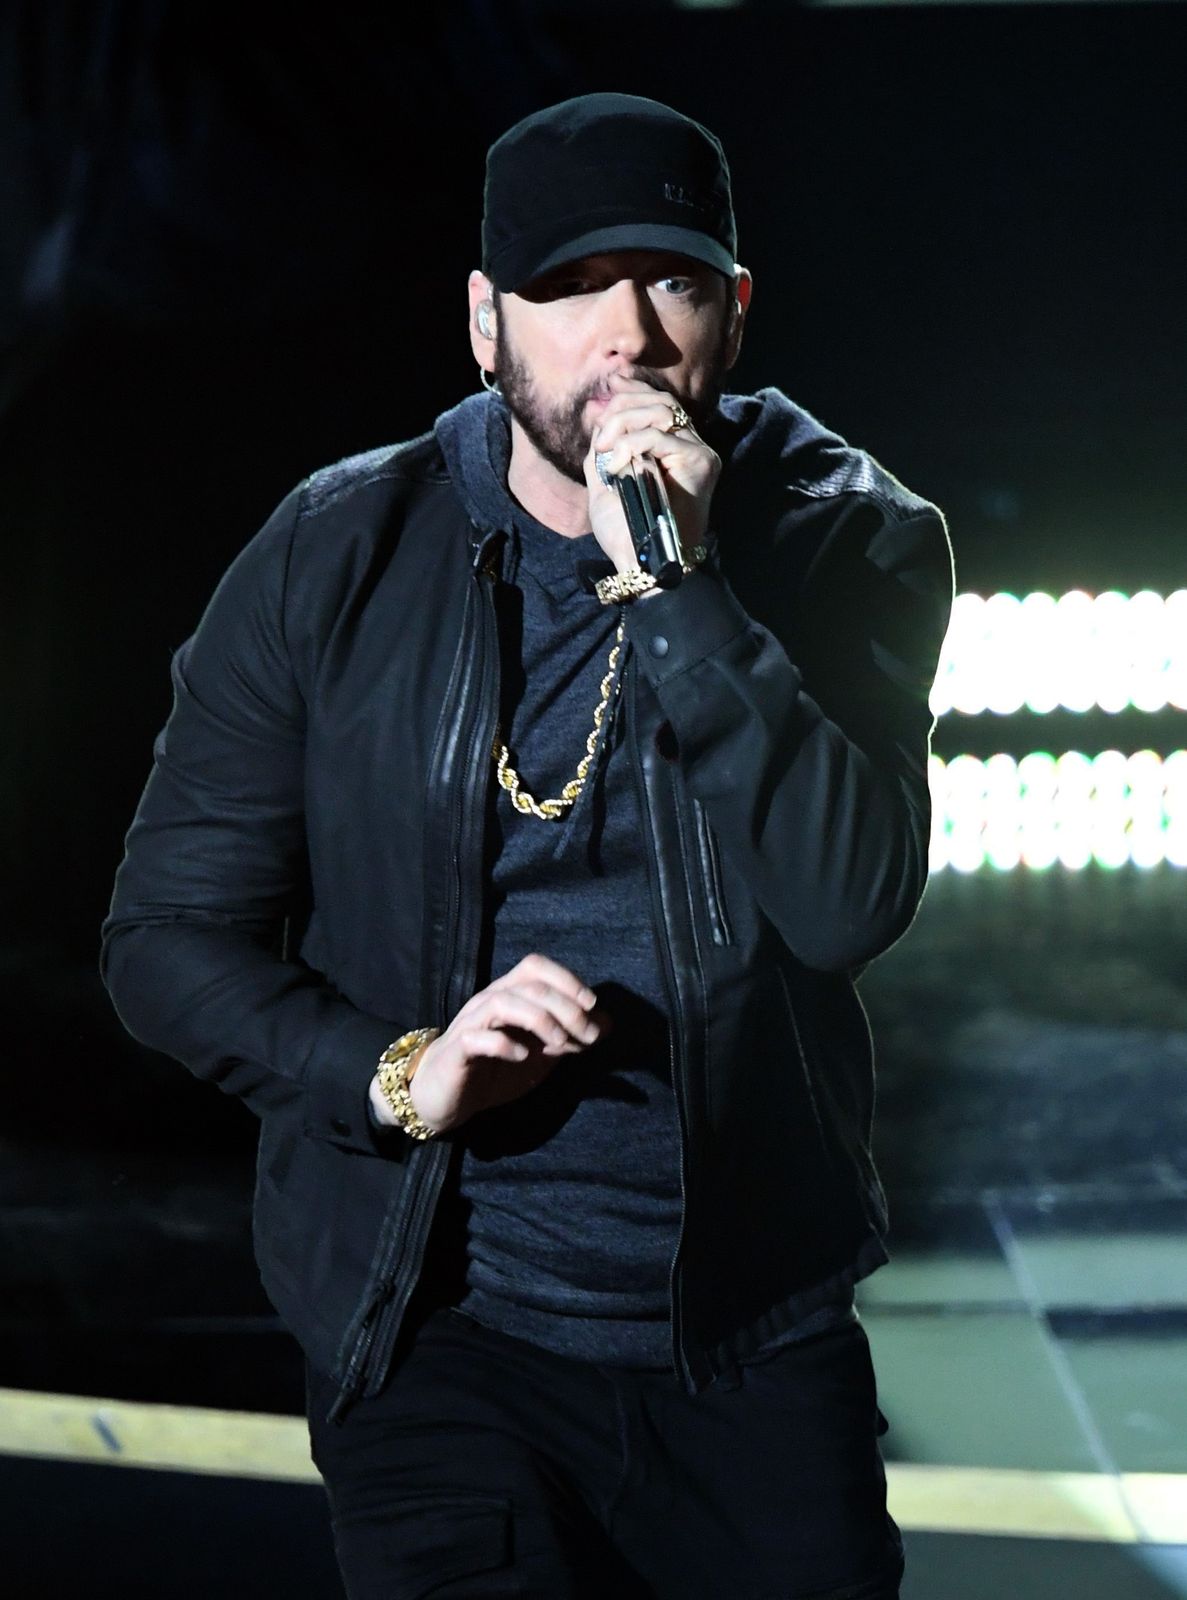 Eminem On Surprise Performance At Oscars 2020, 17 Years After Win: Didn't Feel A Show Like That Would Understand Me